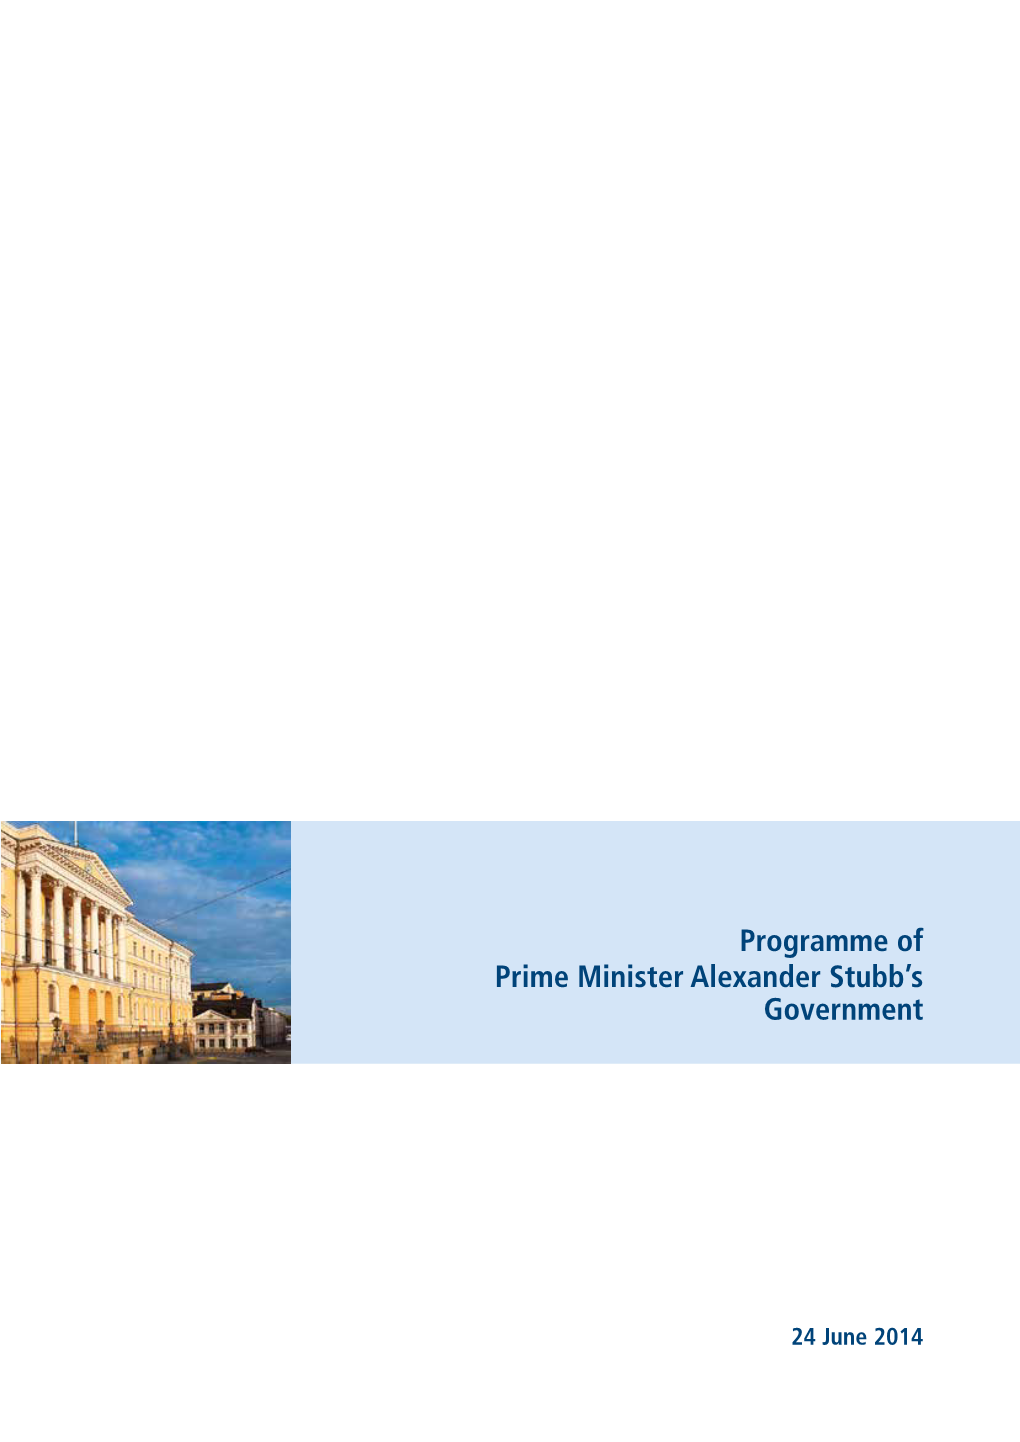 Programme of Prime Minister Alexander Stubb's Government